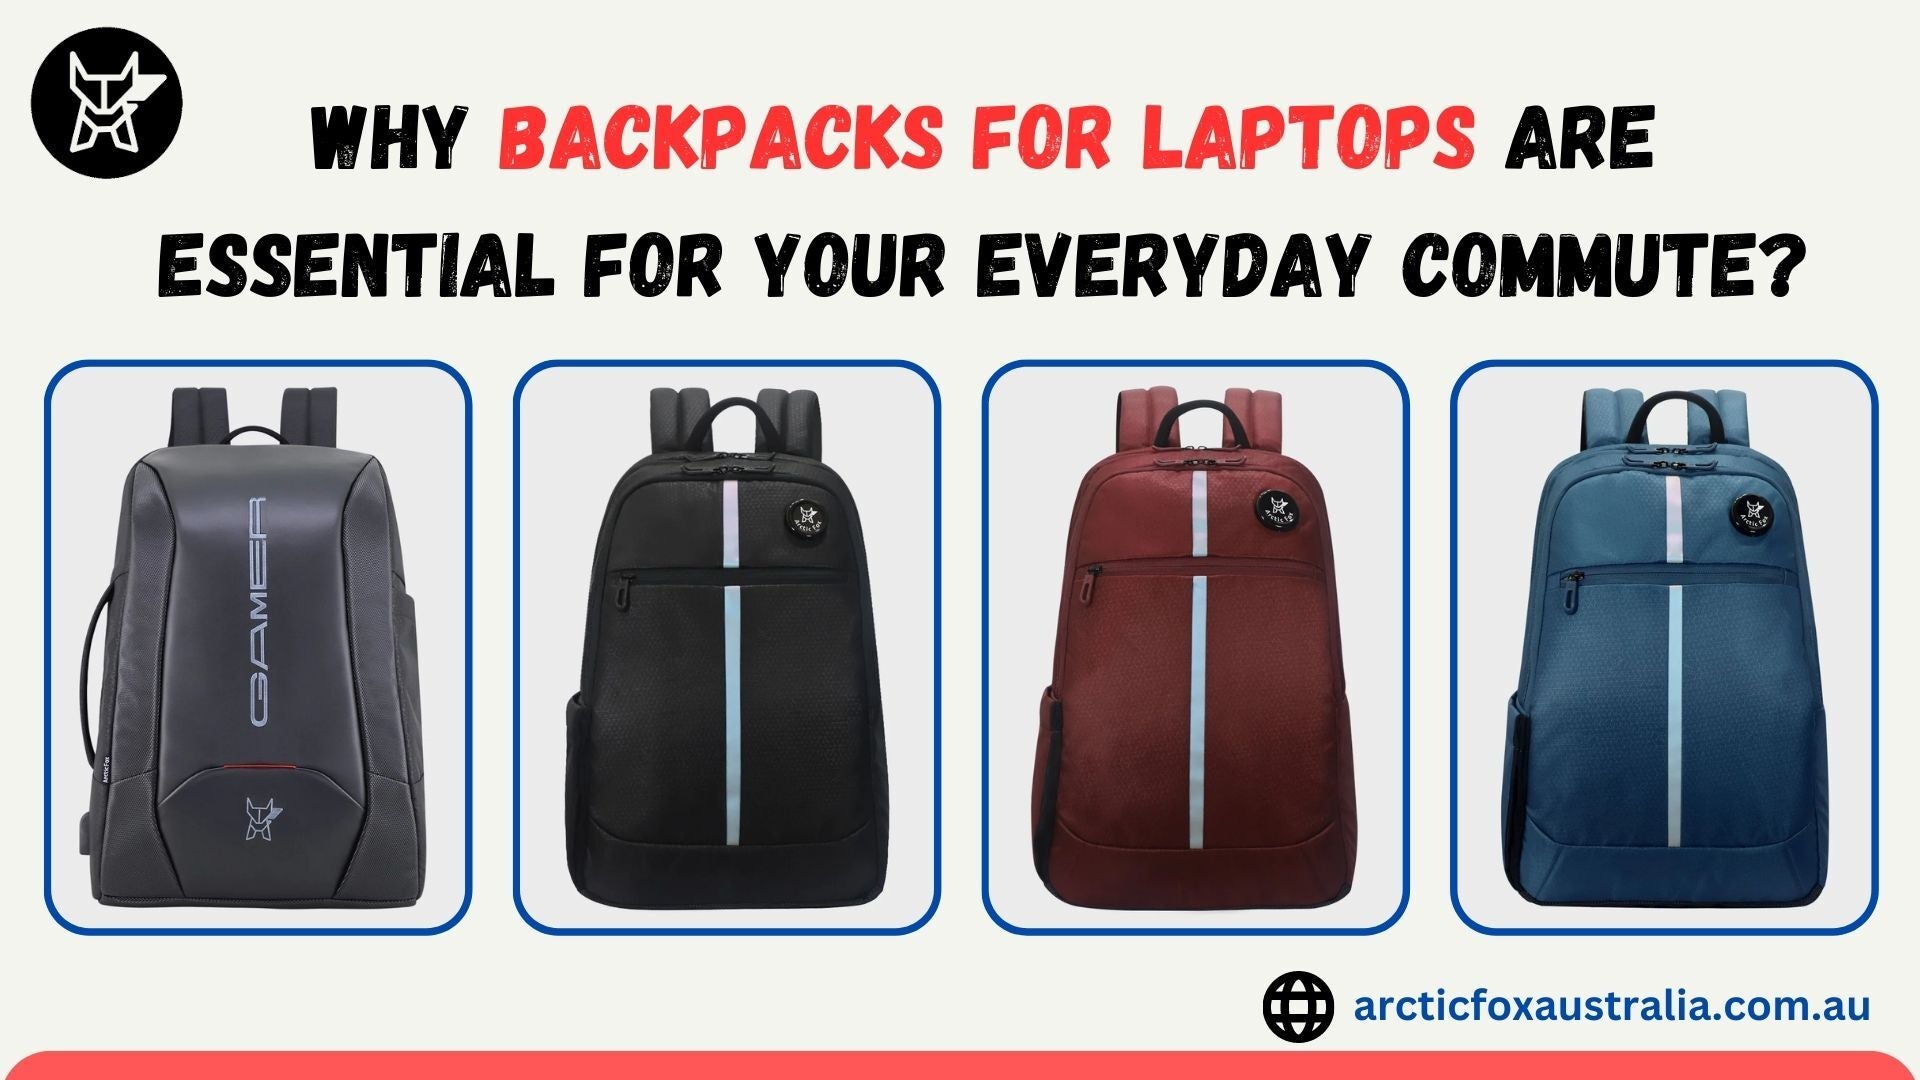 Why Backpacks for Laptops are Essential for Your Everyday Commute?